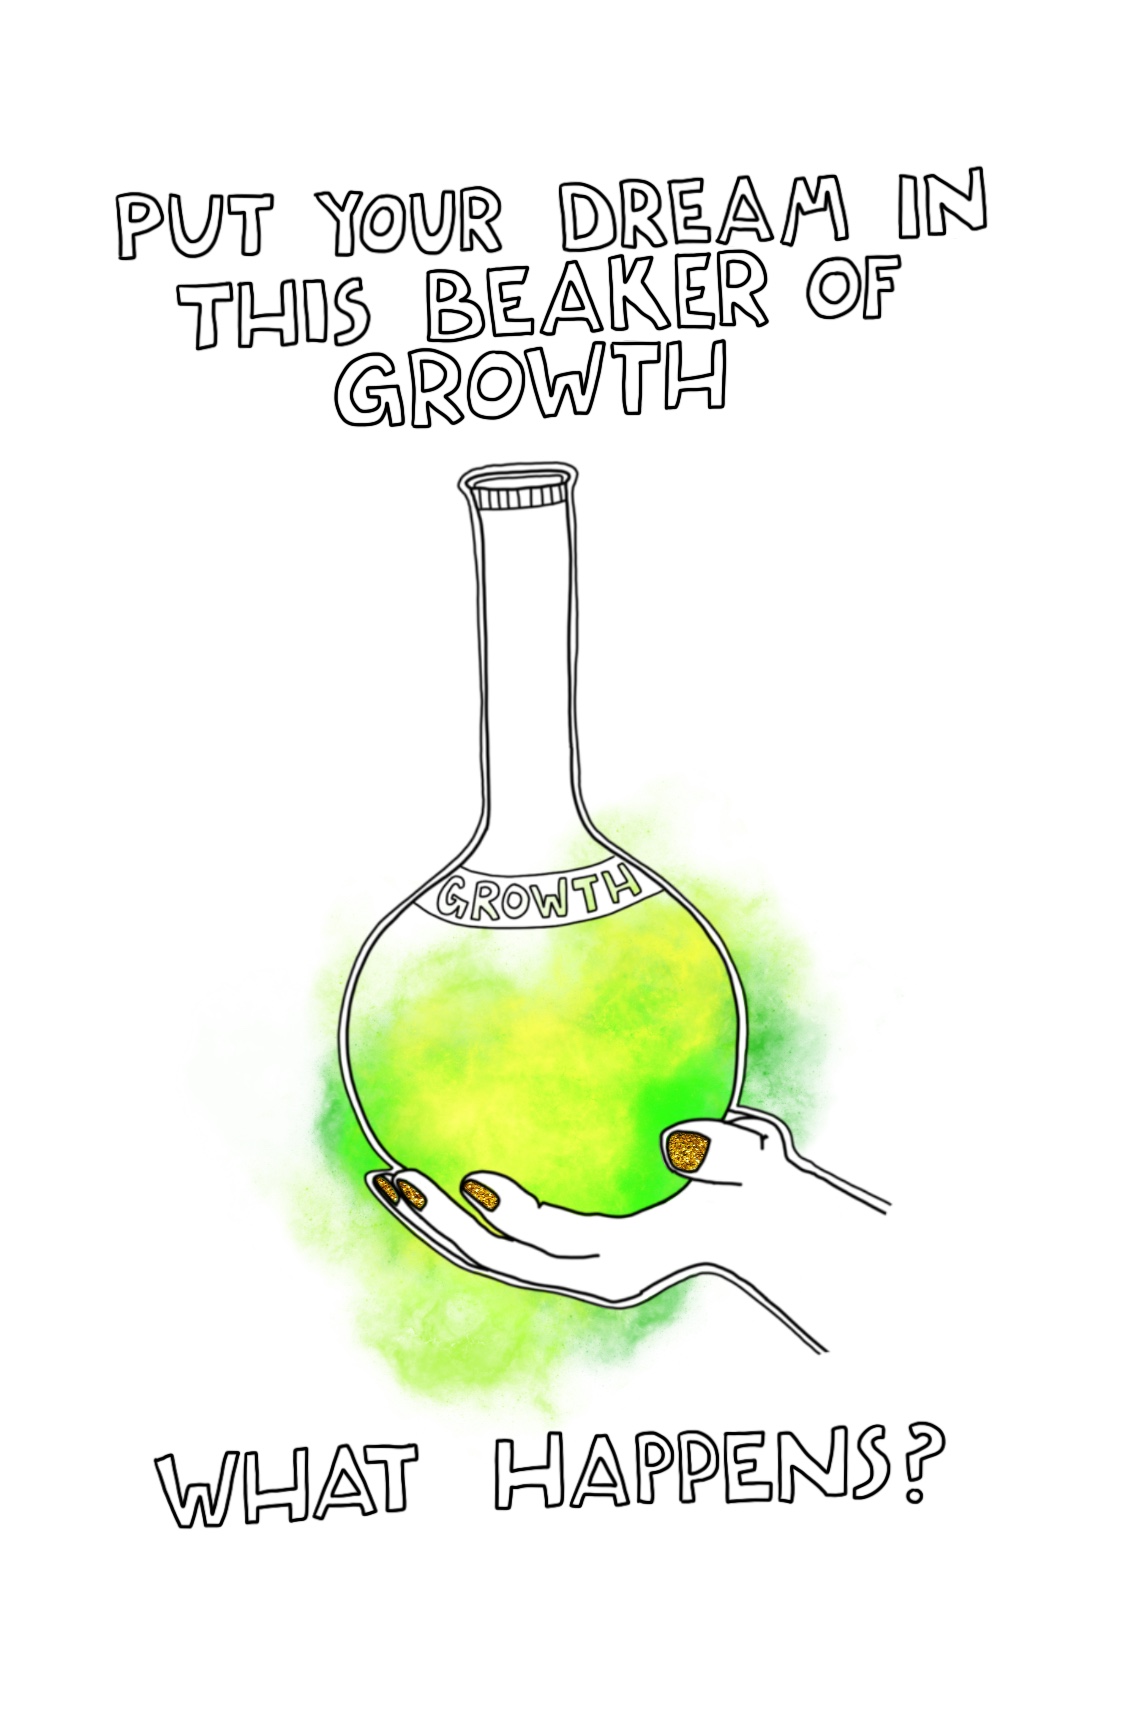 Journal prompt: Put your dream in this beaker of growth. What happens?